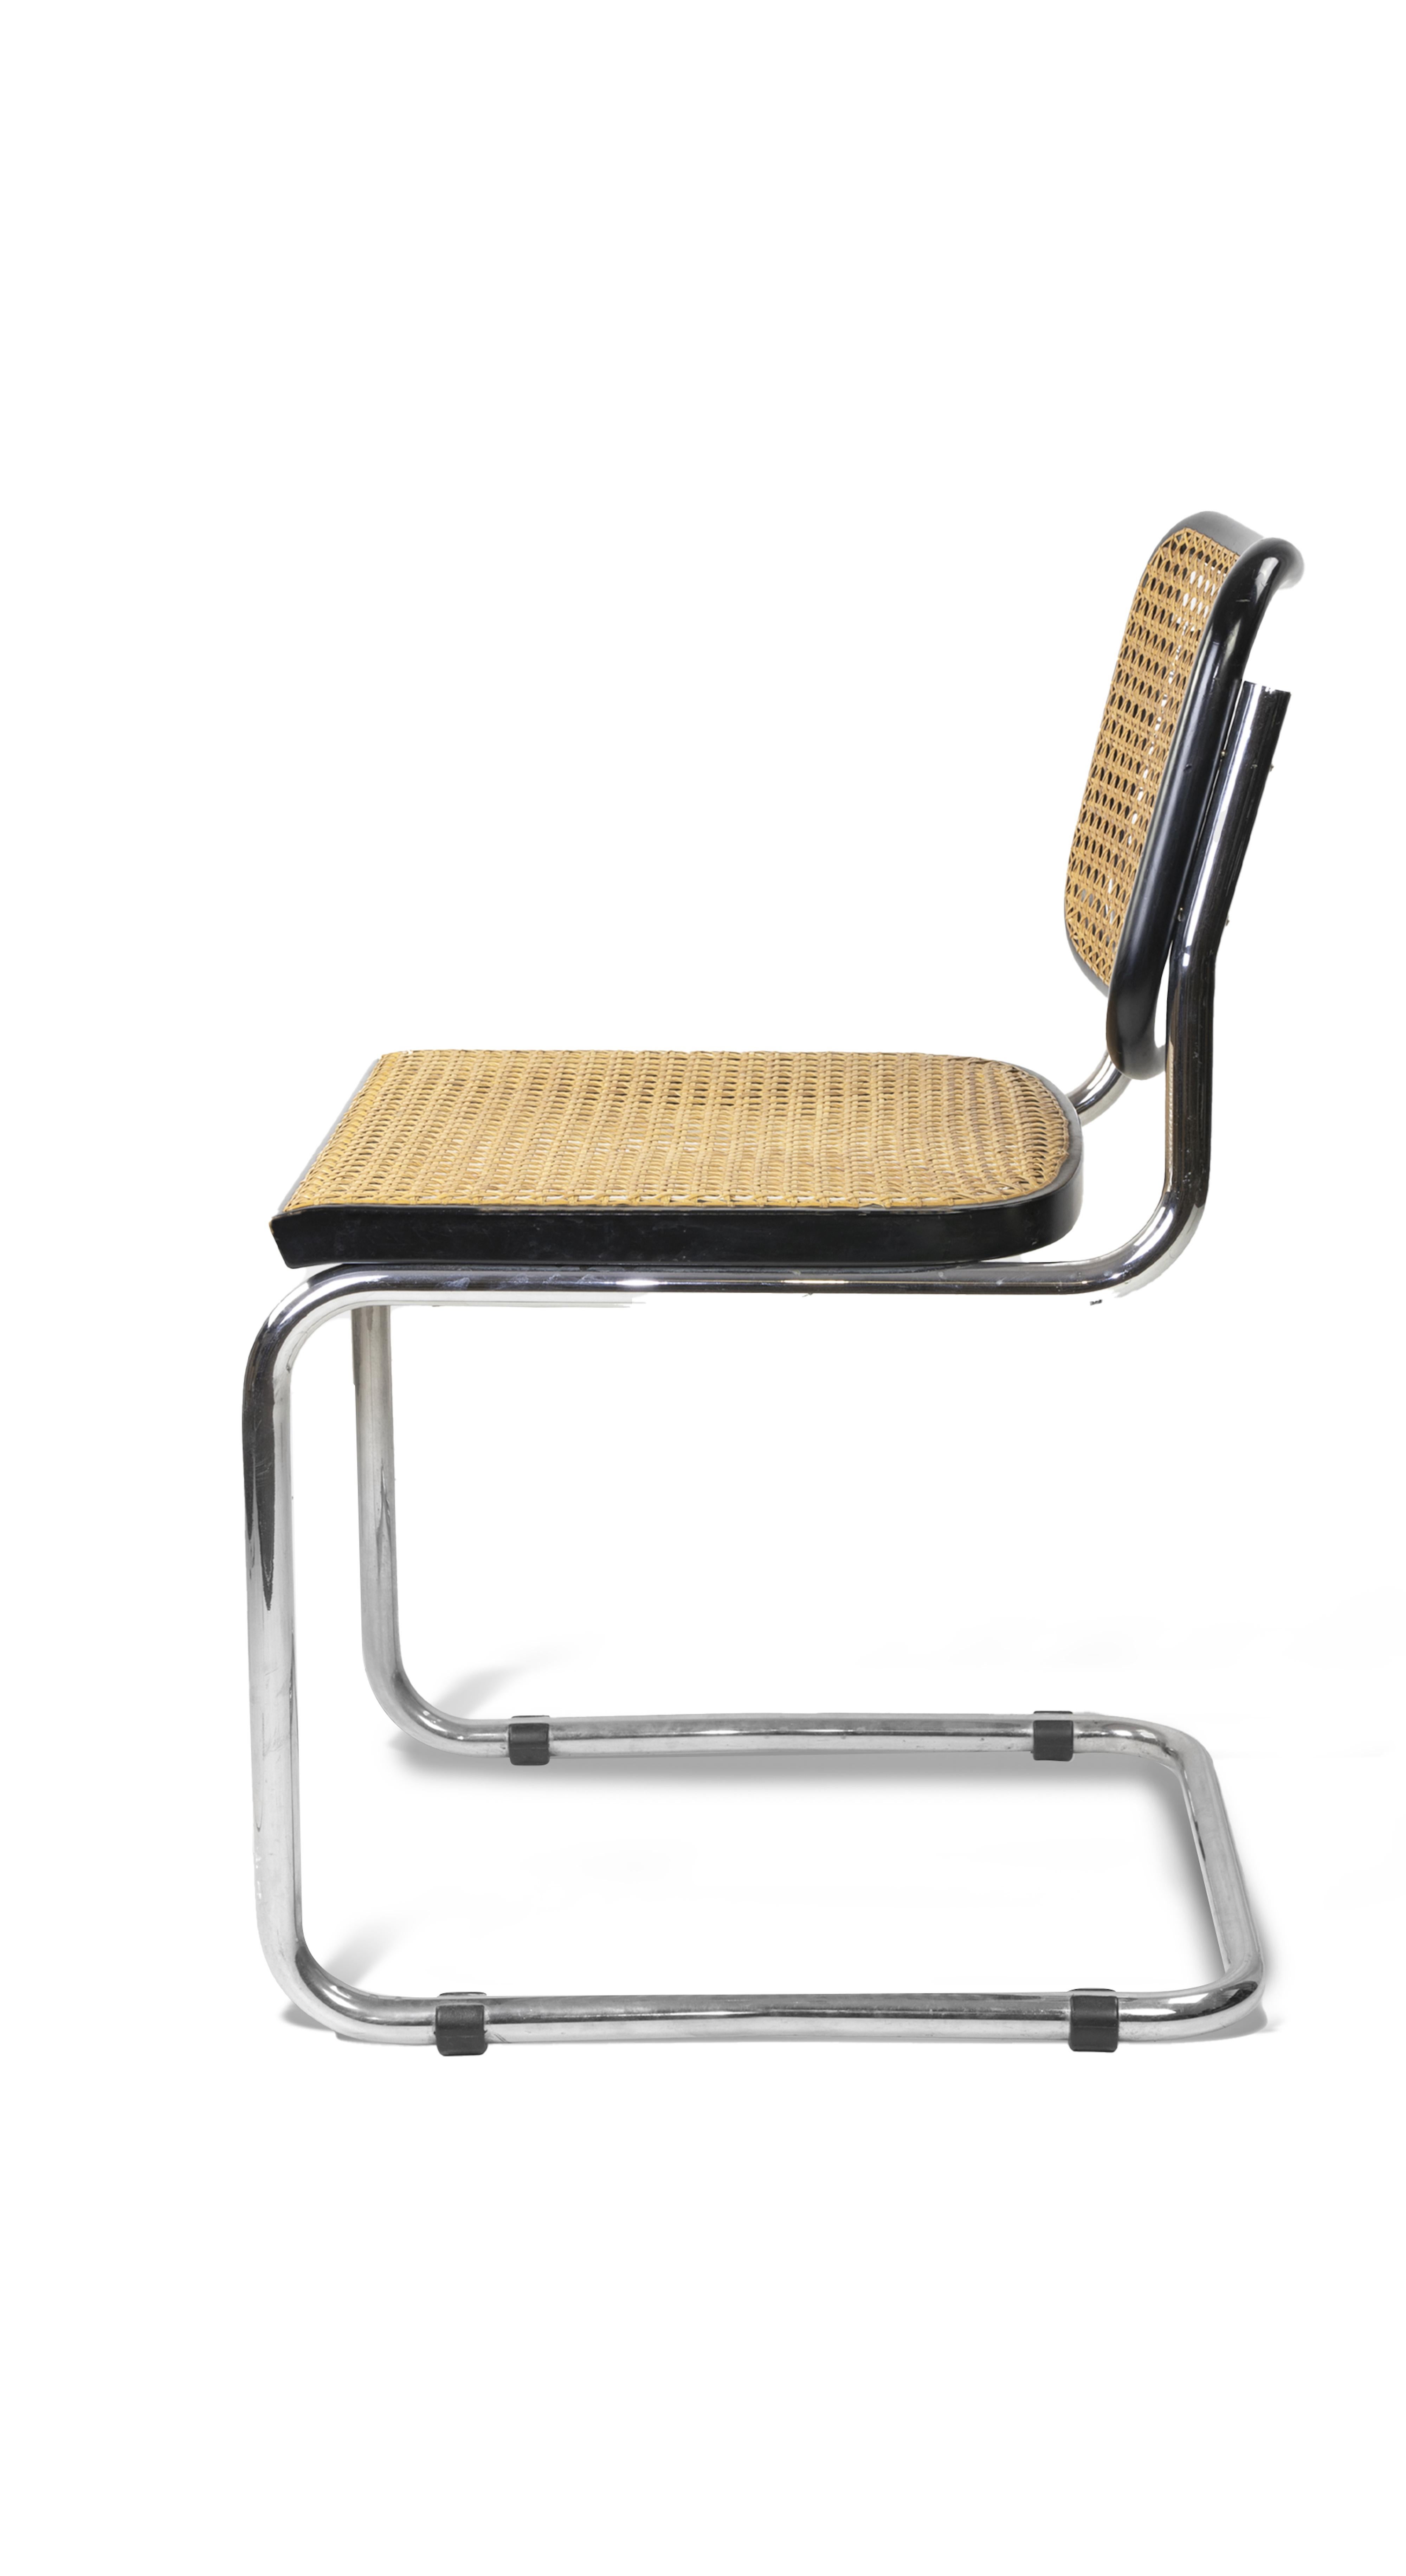 Set of 6 CESCA Chairs by Marcel Breuer for Dino Gavina, Italy 1970s. 

Load-bearing structure in mannesmann-type continuous tubular steel, cold-bent chrome-plated. Seat and backrest made of black lacquered wooden frame inside in Vienna straw